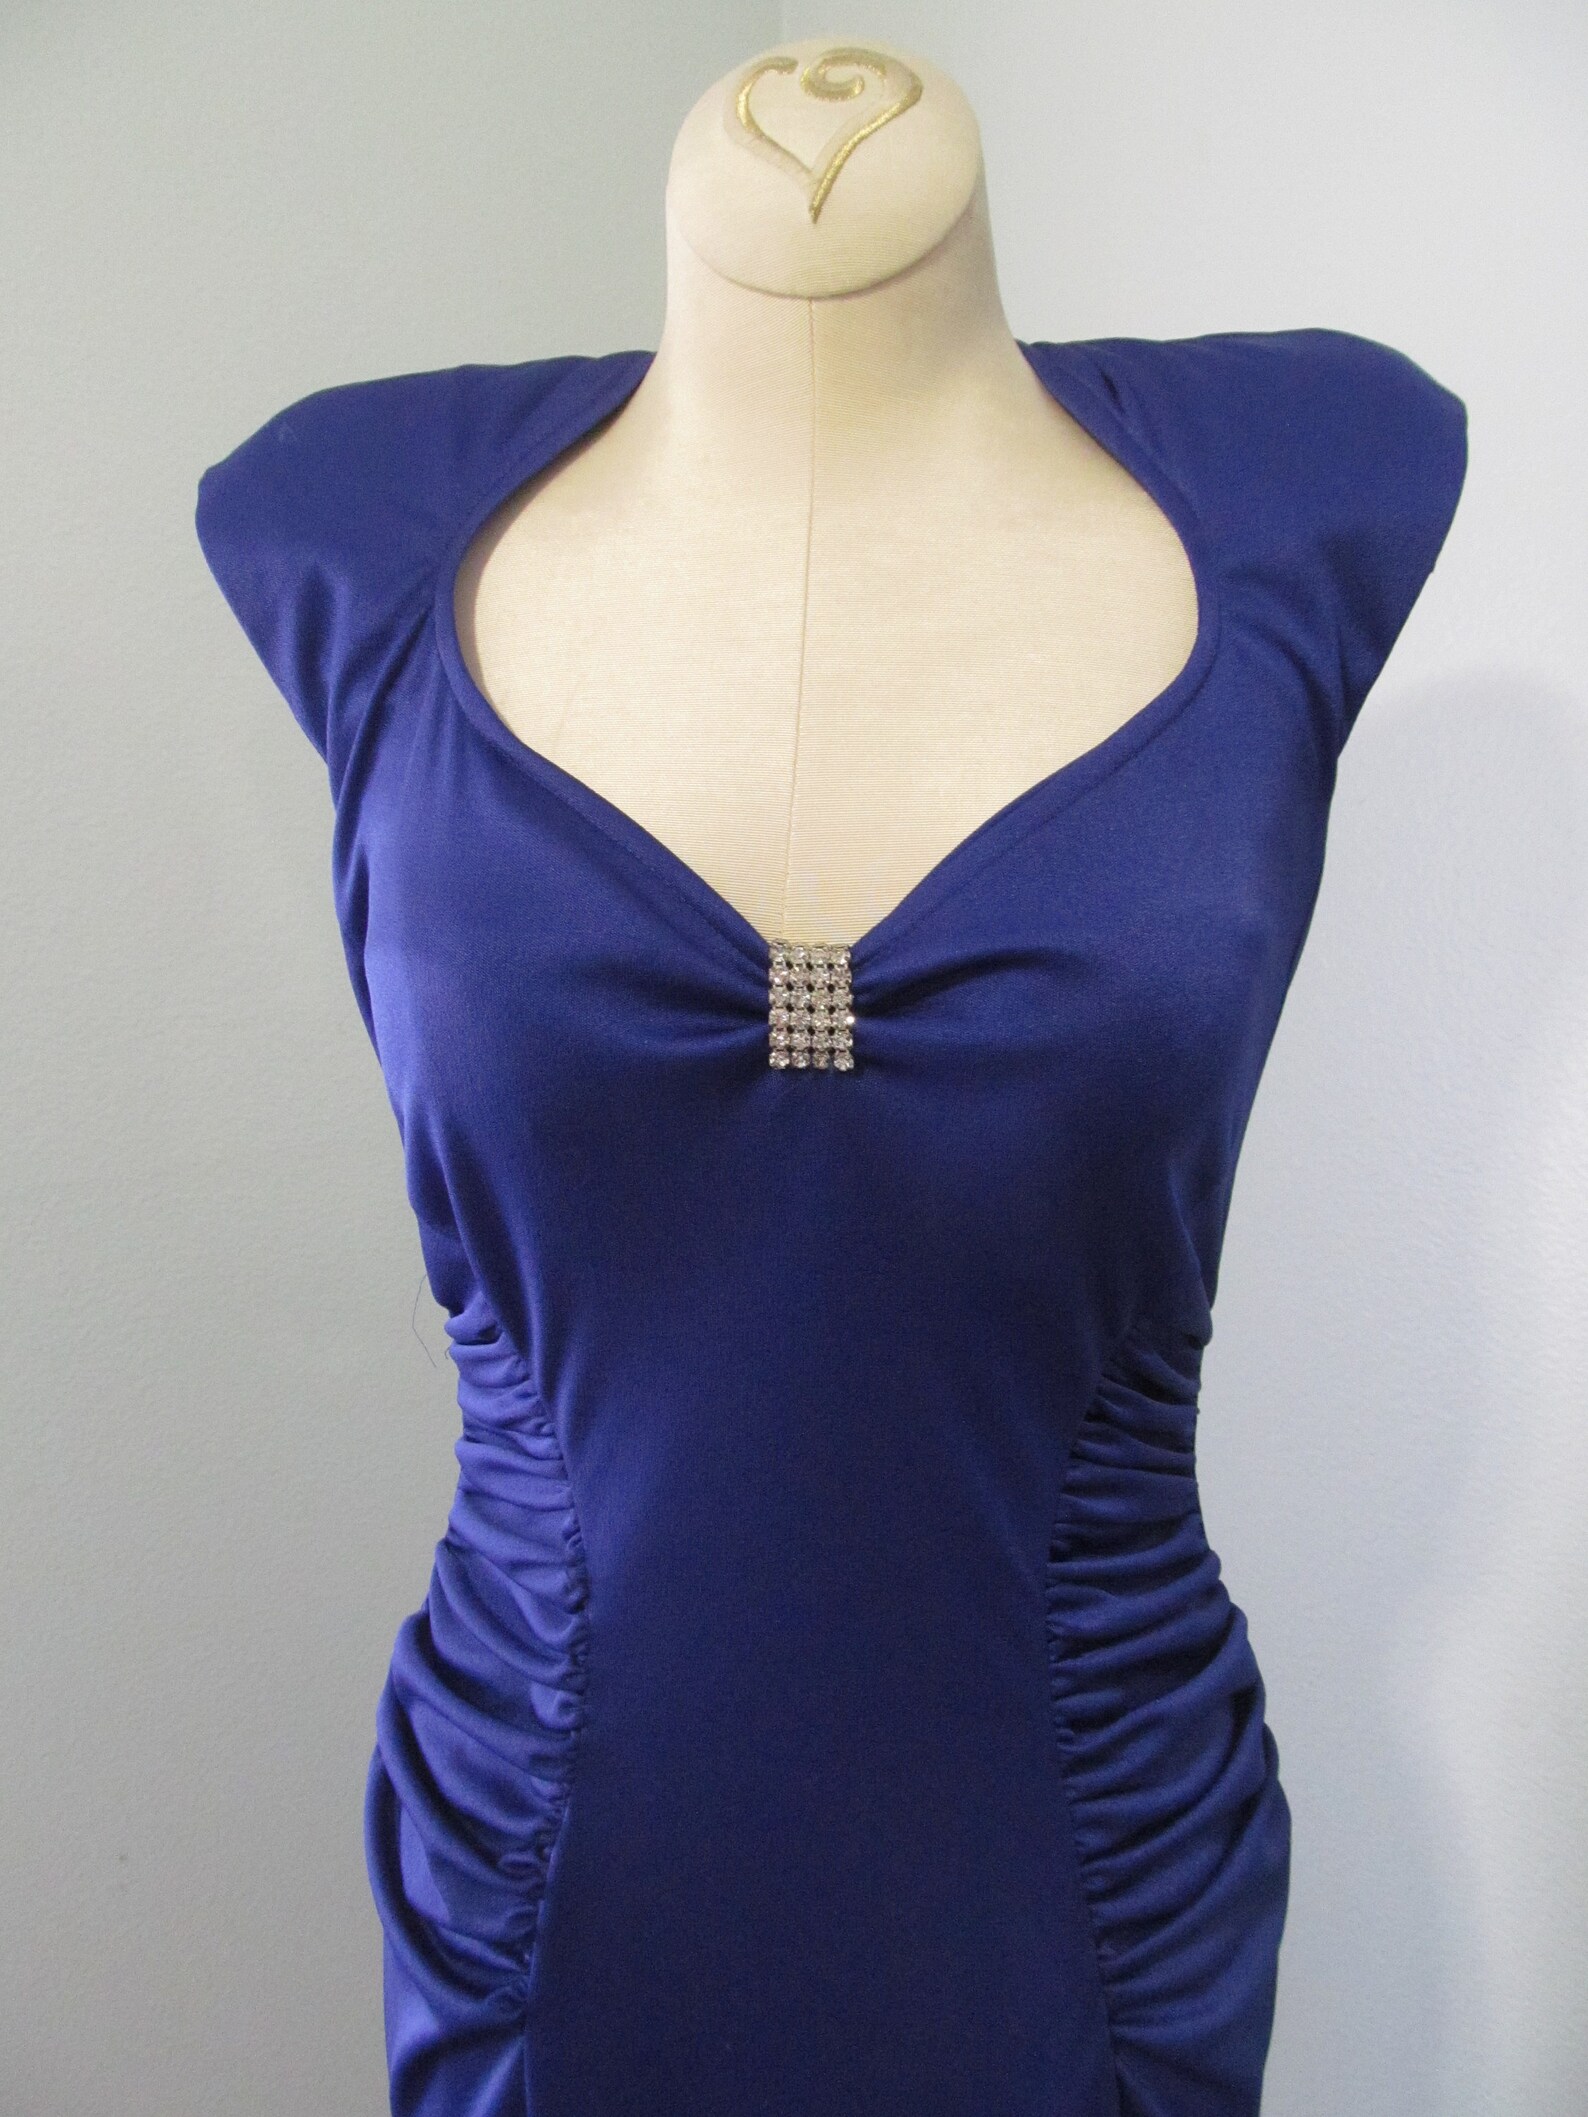 Vintage 1980s Royal Blue Party Dress With Uneven Hemline Very Low Back Made In California Etsy